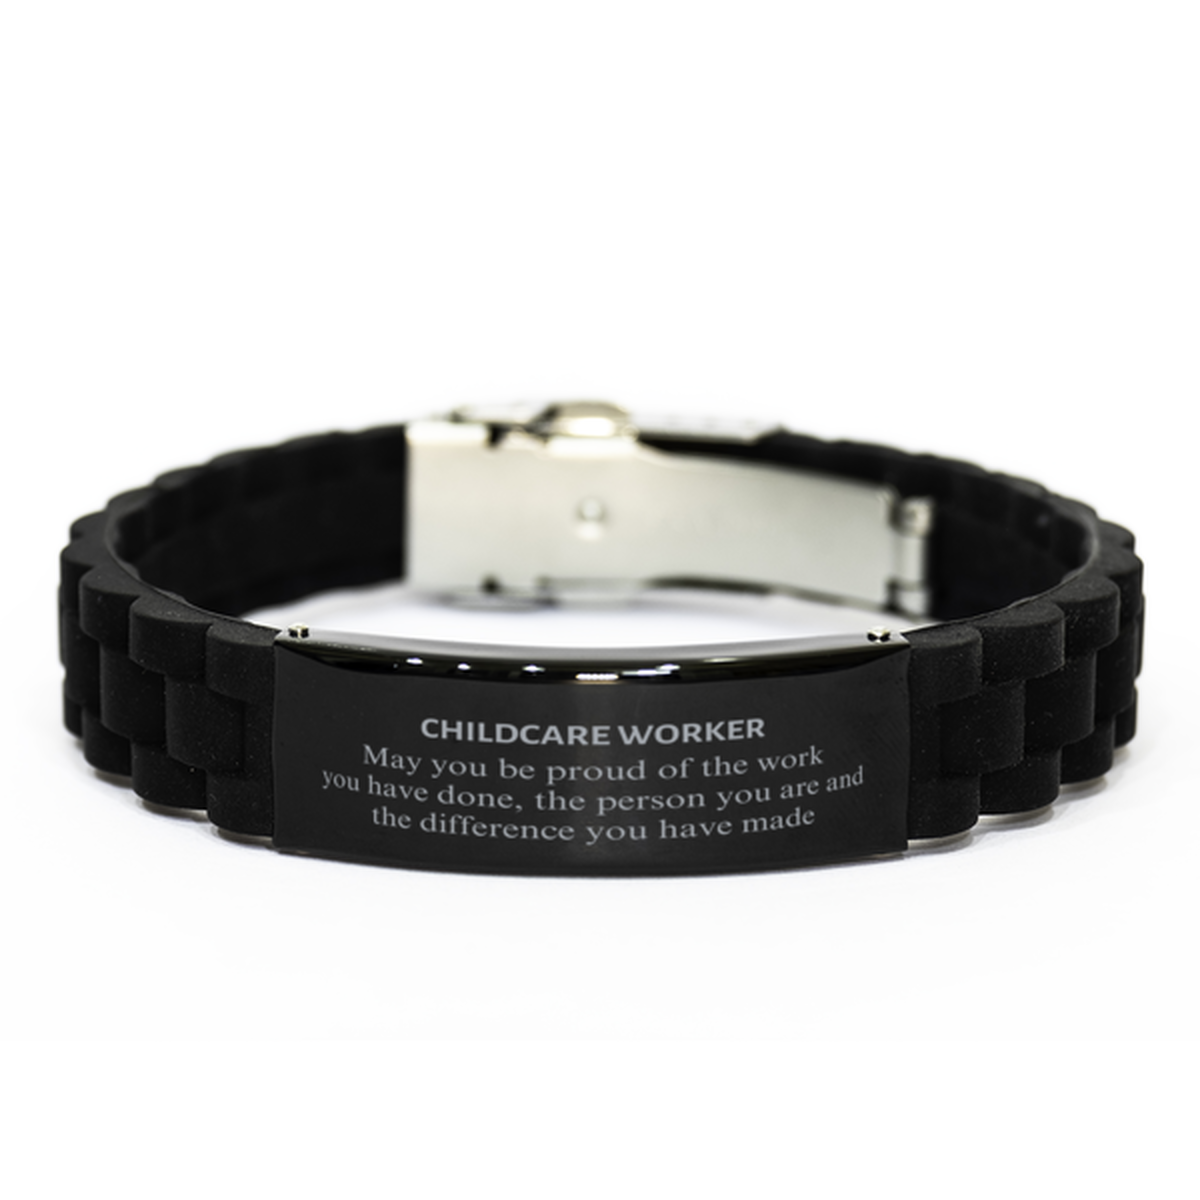 Childcare Worker May you be proud of the work you have done, Retirement Childcare Worker Black Glidelock Clasp Bracelet for Colleague Appreciation Gifts Amazing for Childcare Worker